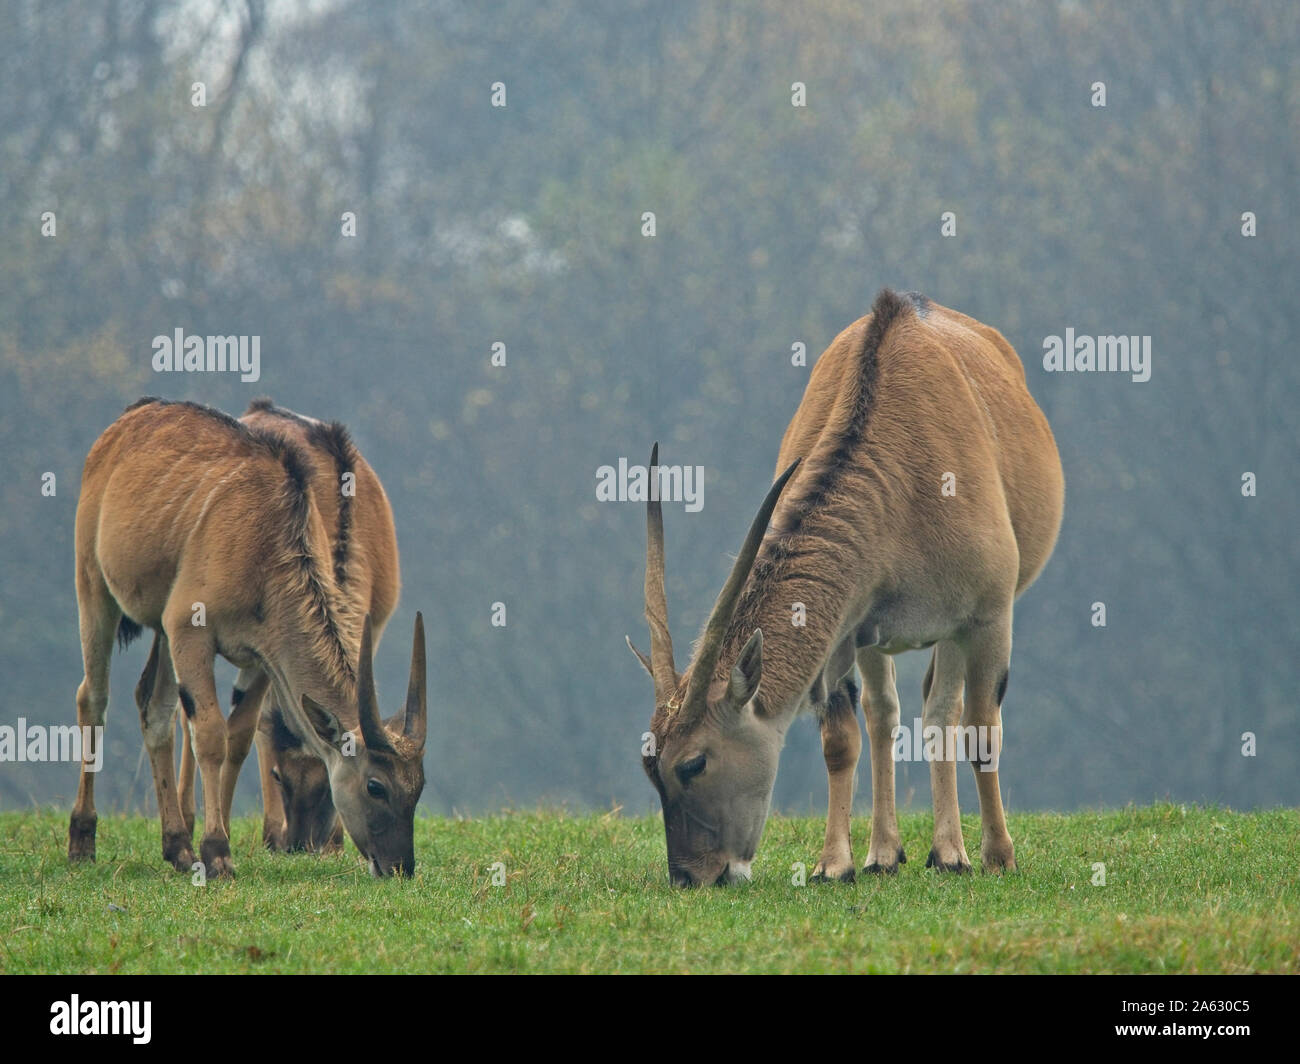 Eland Antelope (Taurotragus oryx) It is one of the largest antelopes, these animals are very difficult to approach. Stock Photo